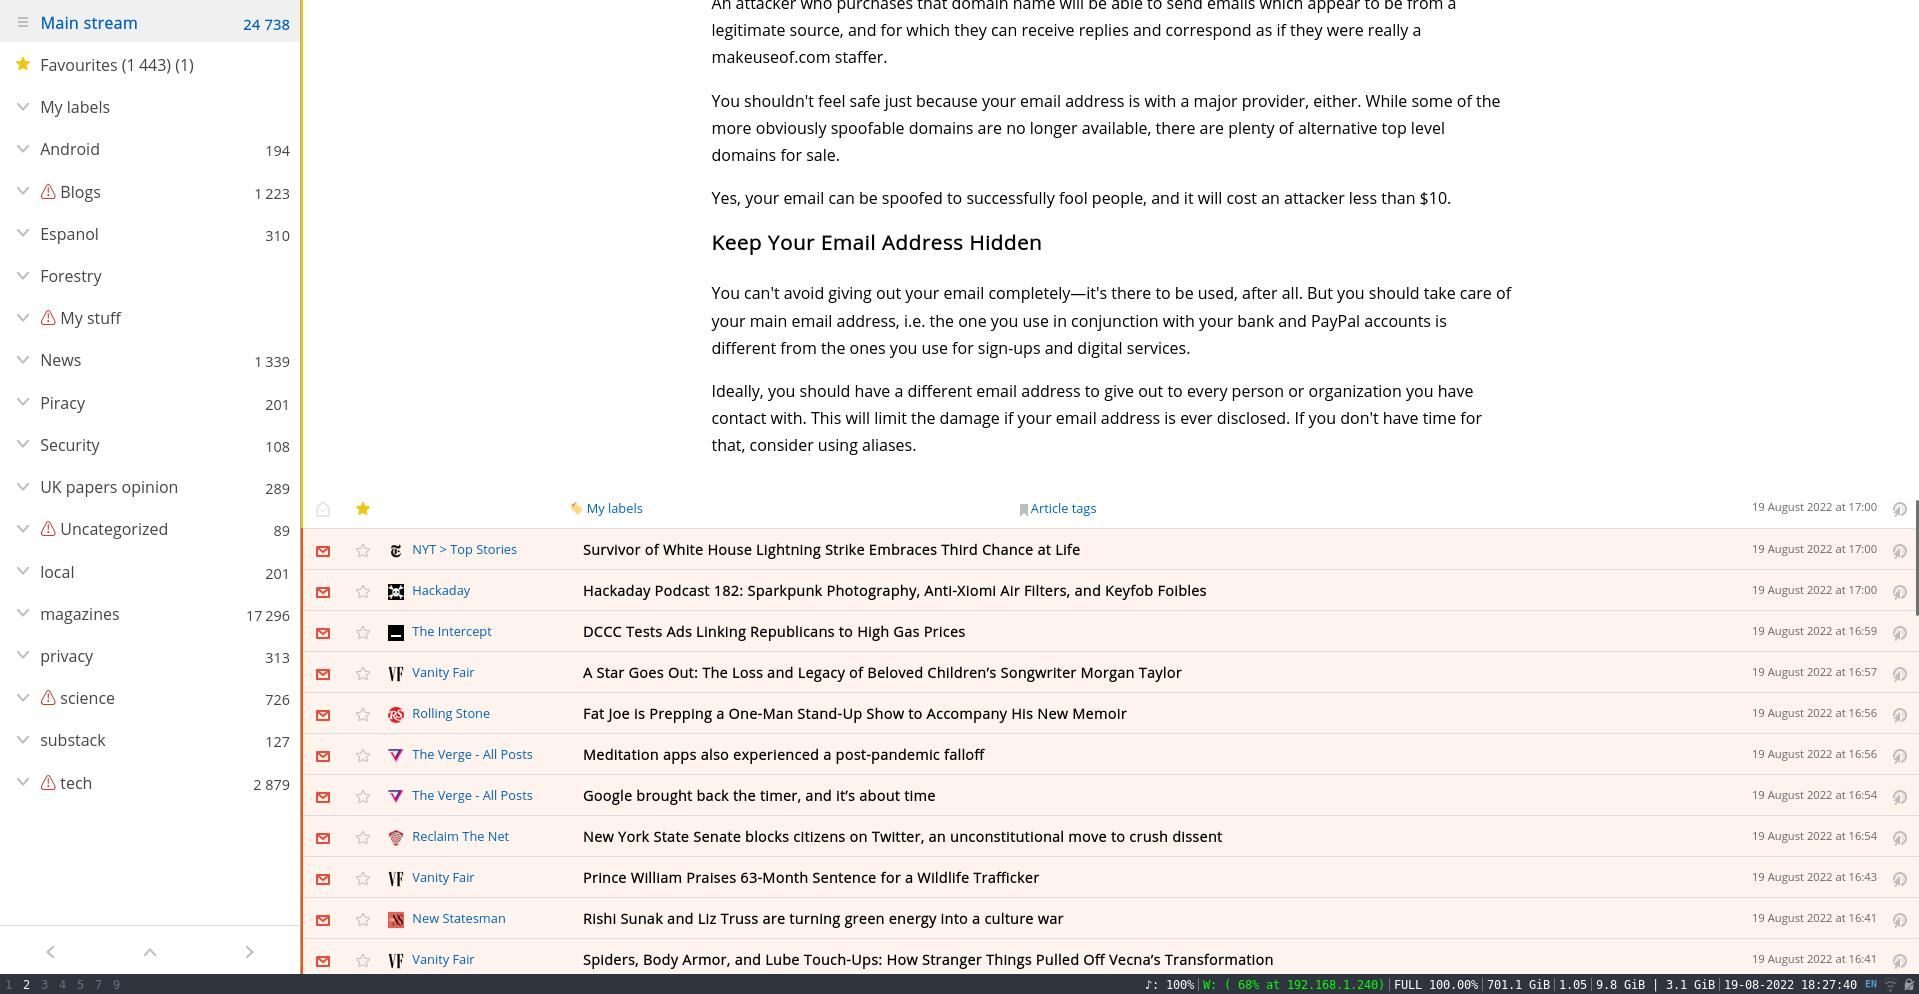 freshrss showing feeds and categories and the full text of an MUO article